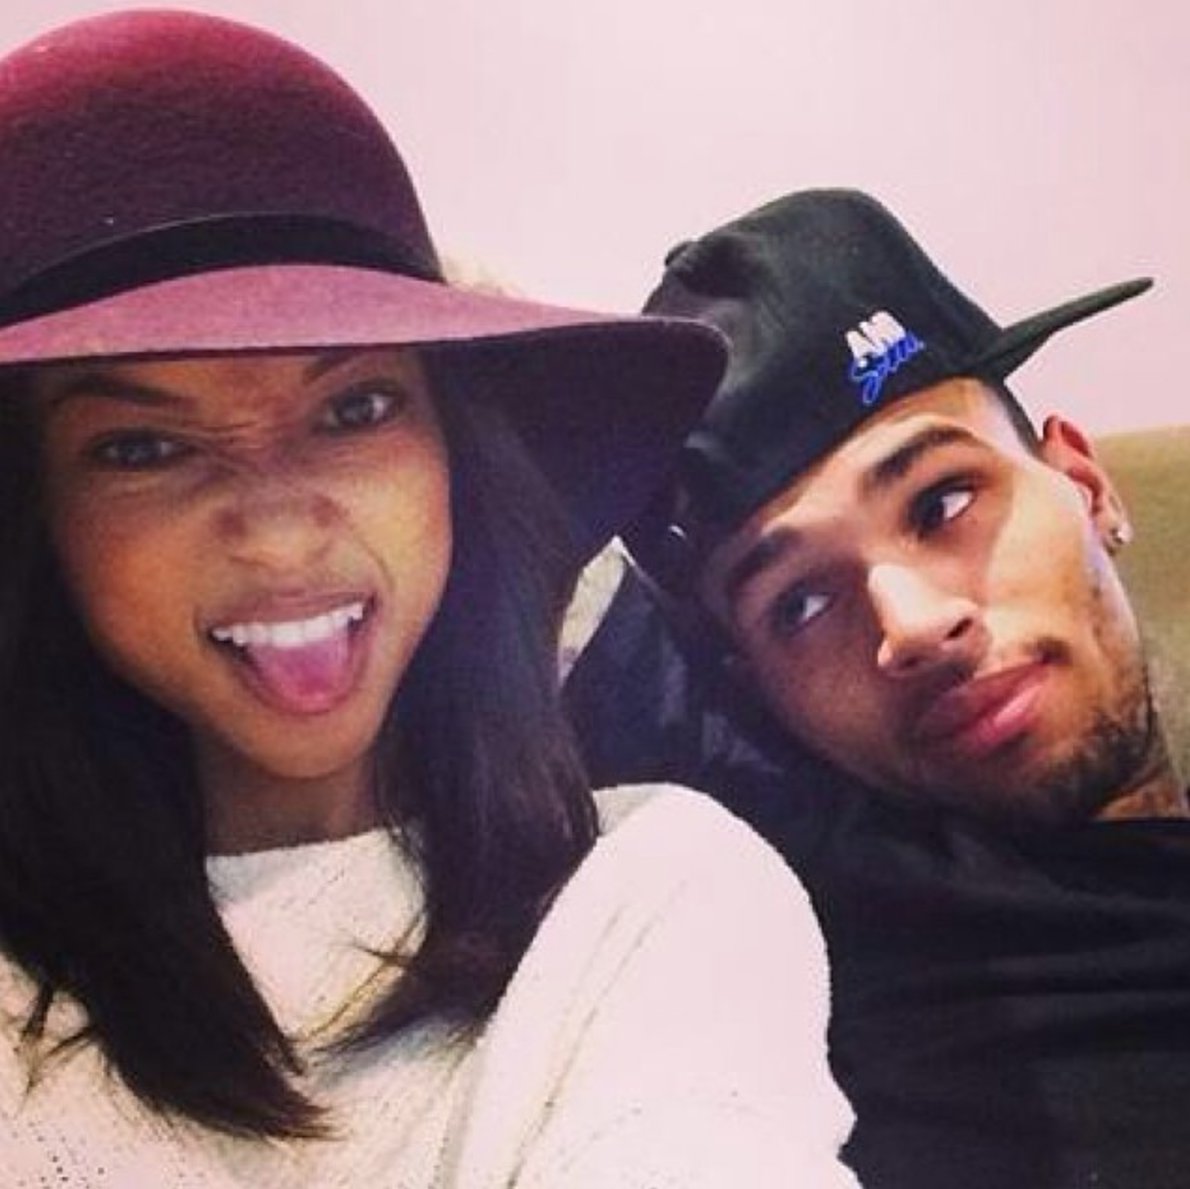 Entity reports on new Chris Brown restraining order filed by Karrueche Tran. 